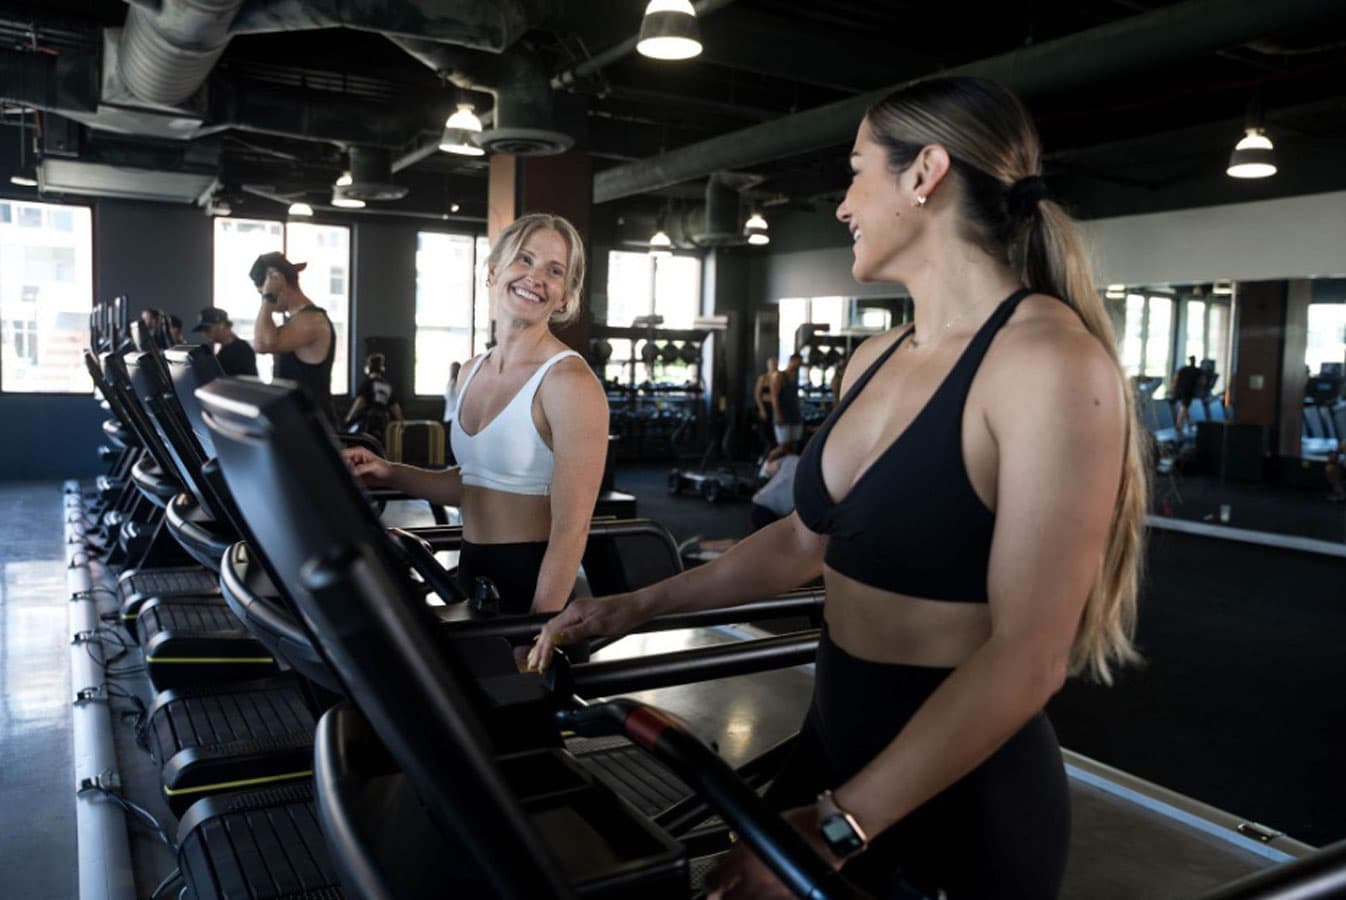 Two women on treadmills in a gym.